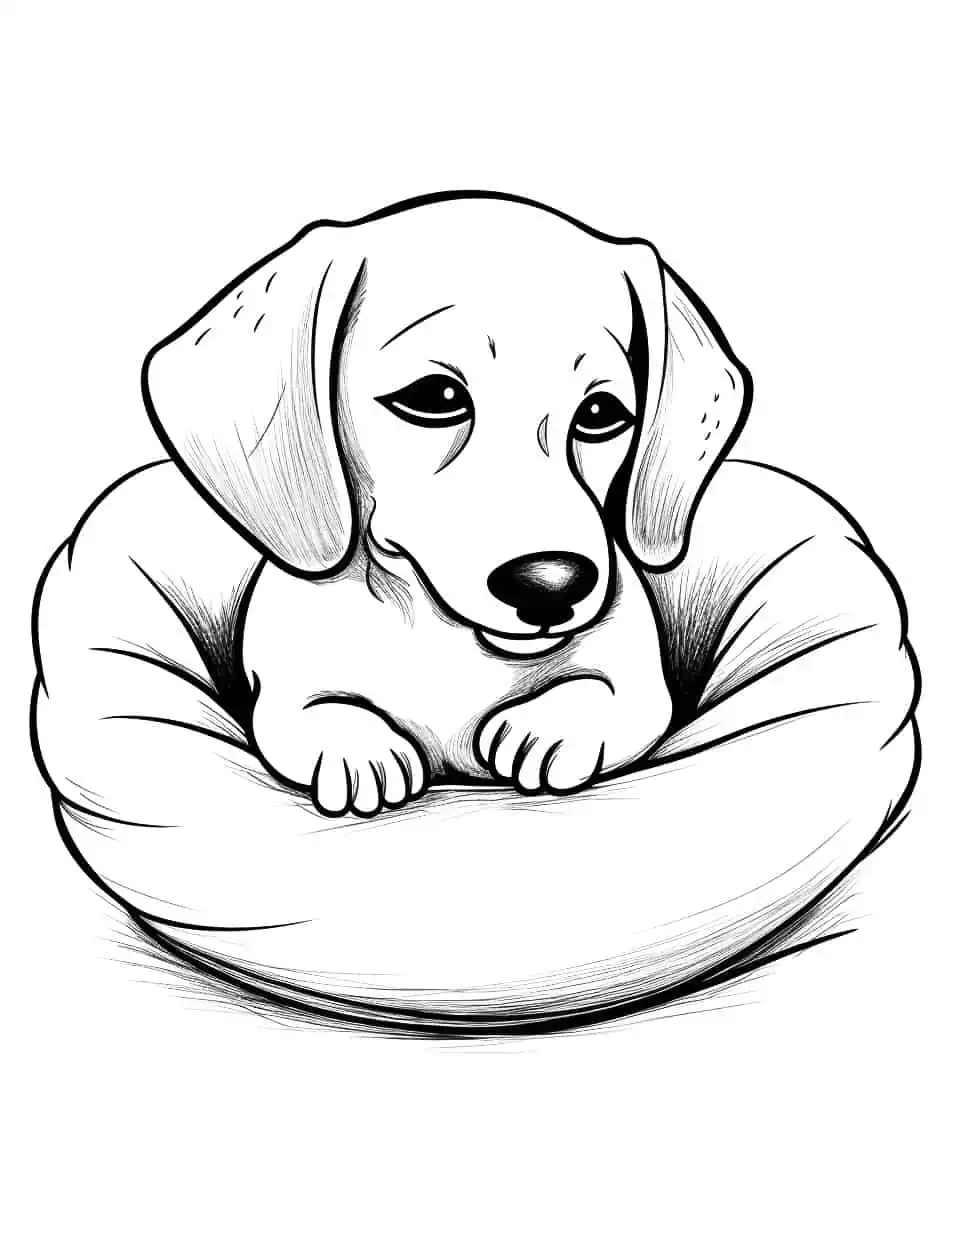 Dachshund's Nap Time Dog Coloring Page - A Dachshund sleeping in a cozy dog bed.